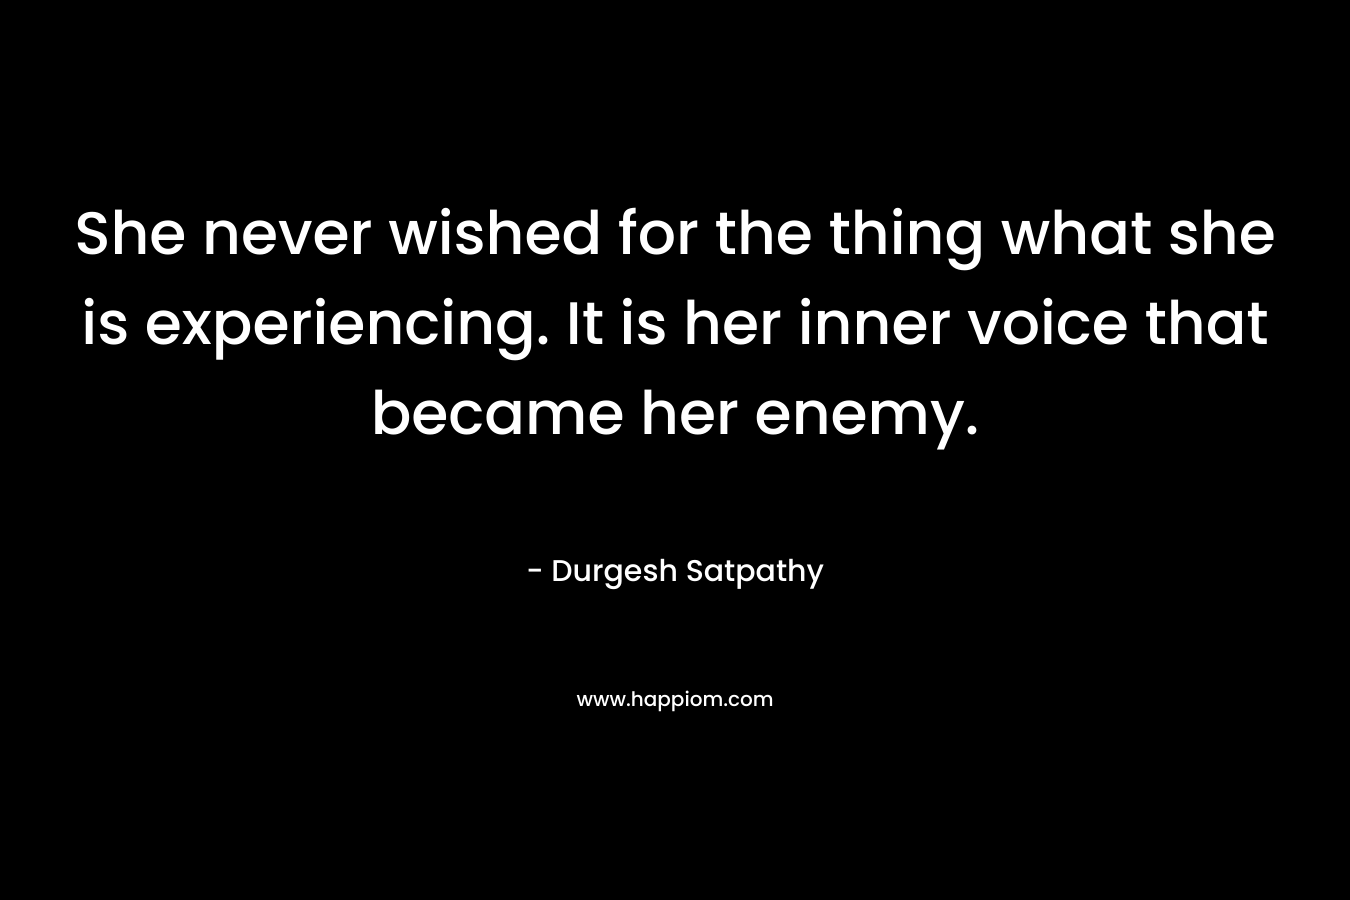 She never wished for the thing what she is experiencing. It is her inner voice that became her enemy. – Durgesh Satpathy